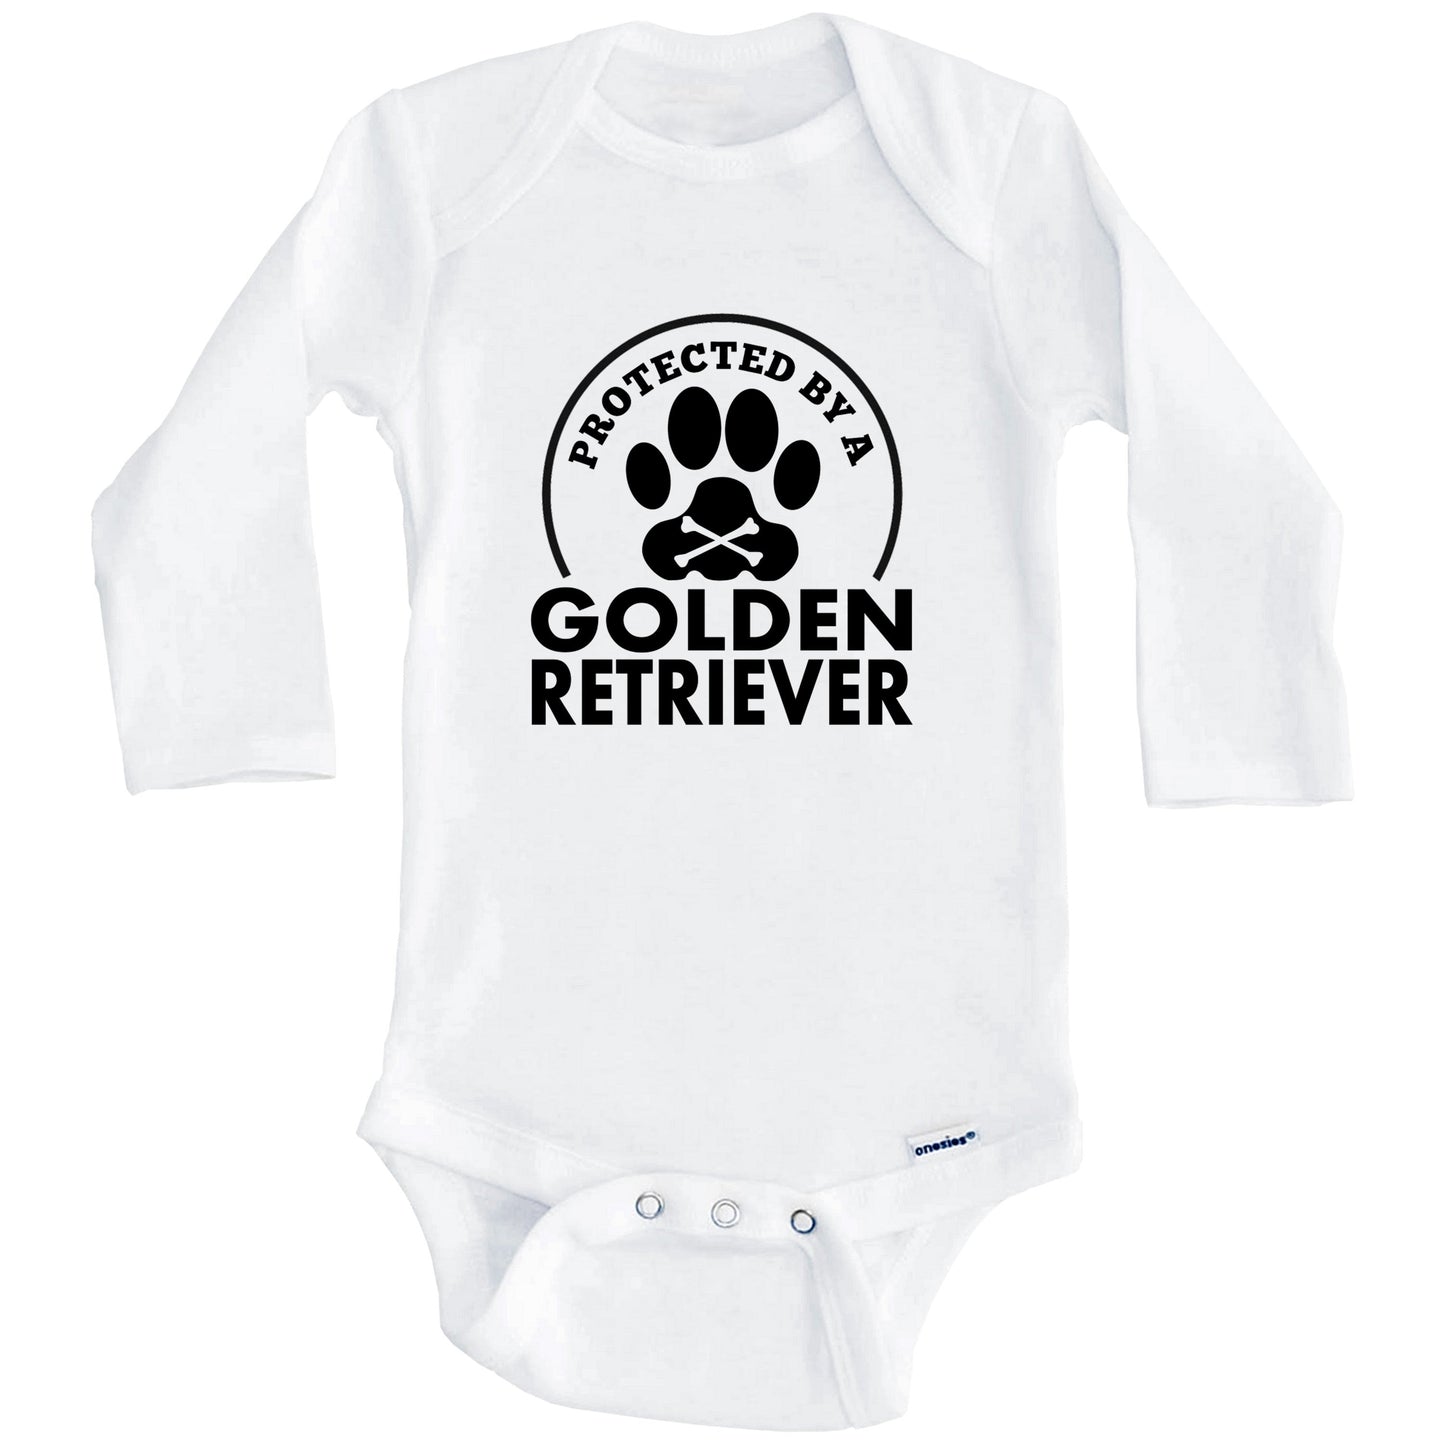 Protected By A Golden Retriever Funny Baby Onesie (Long Sleeves)